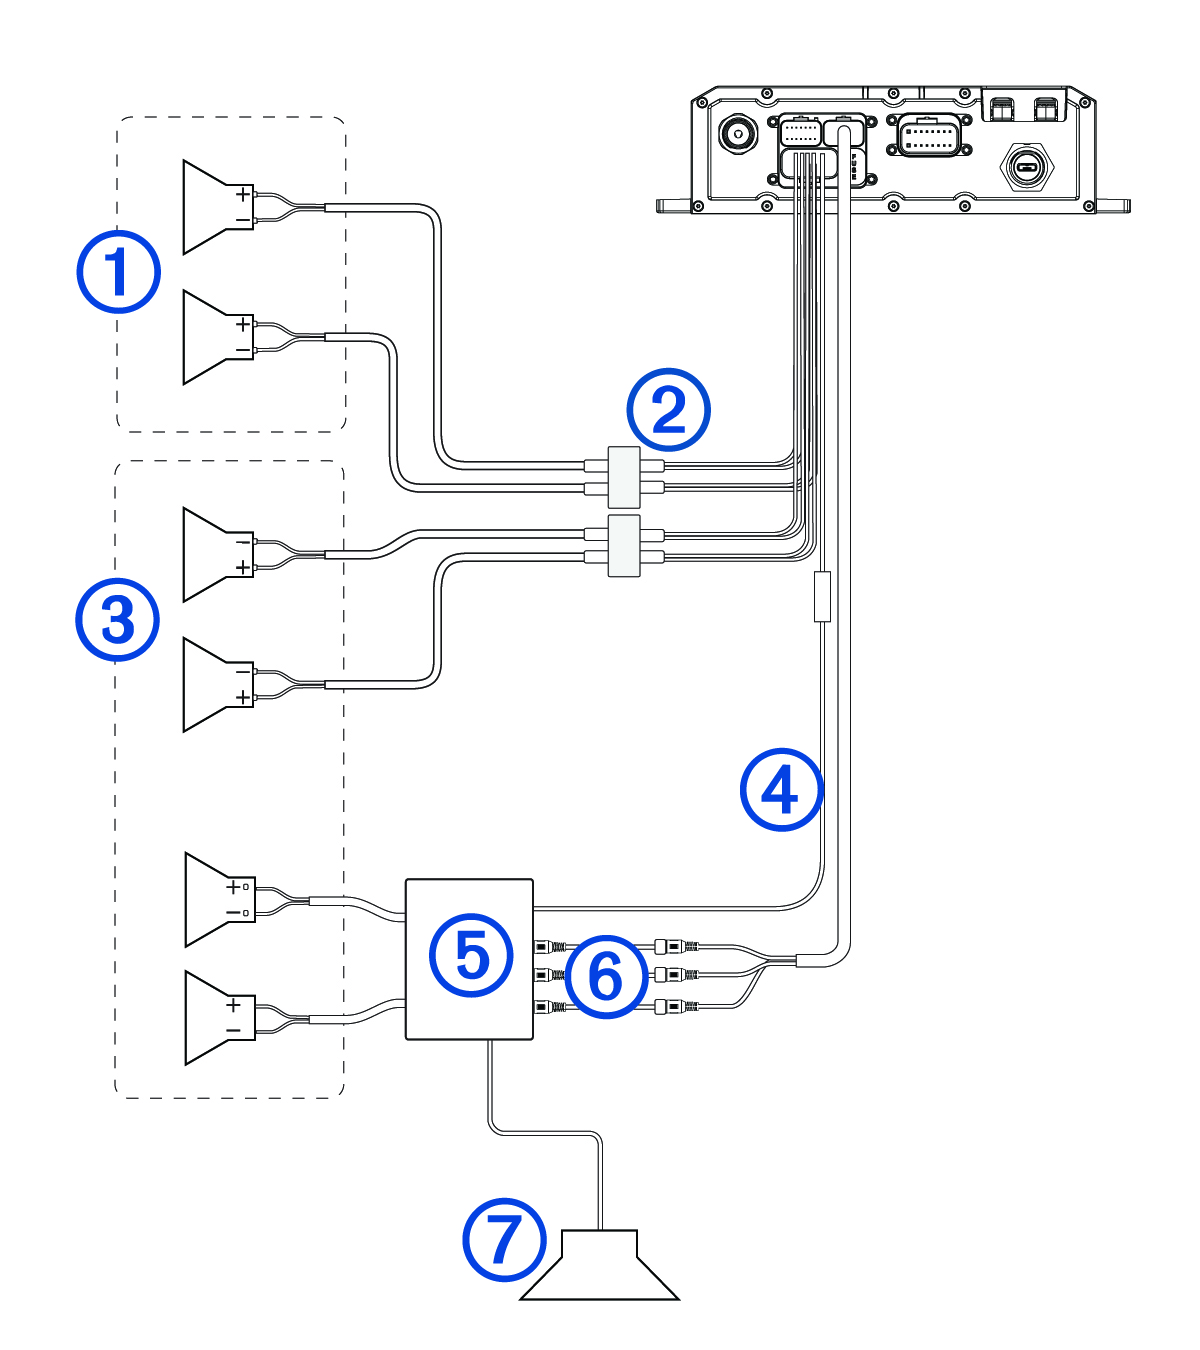 Device wiring diagram with callouts